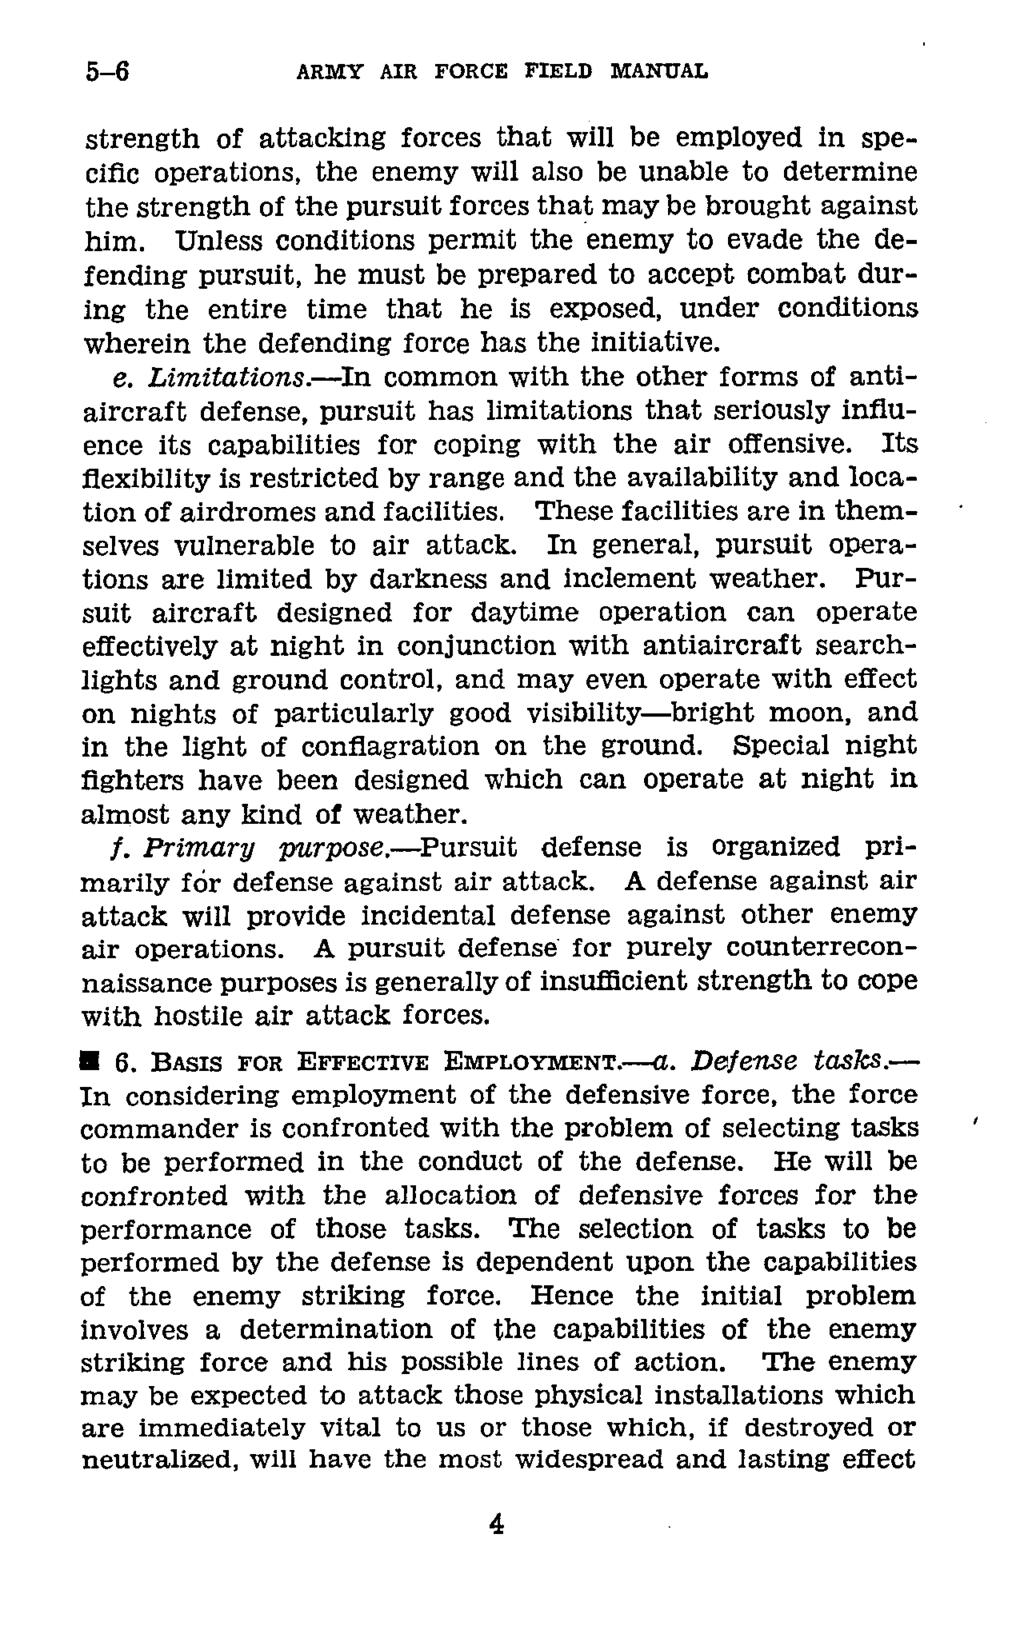 5-6 ARMY AIR FORCE FIELD MANUAL strength of attacking forces that will be employed in specific operations, the enemy will also be unable to determine the strength of the pursuit forces that may be